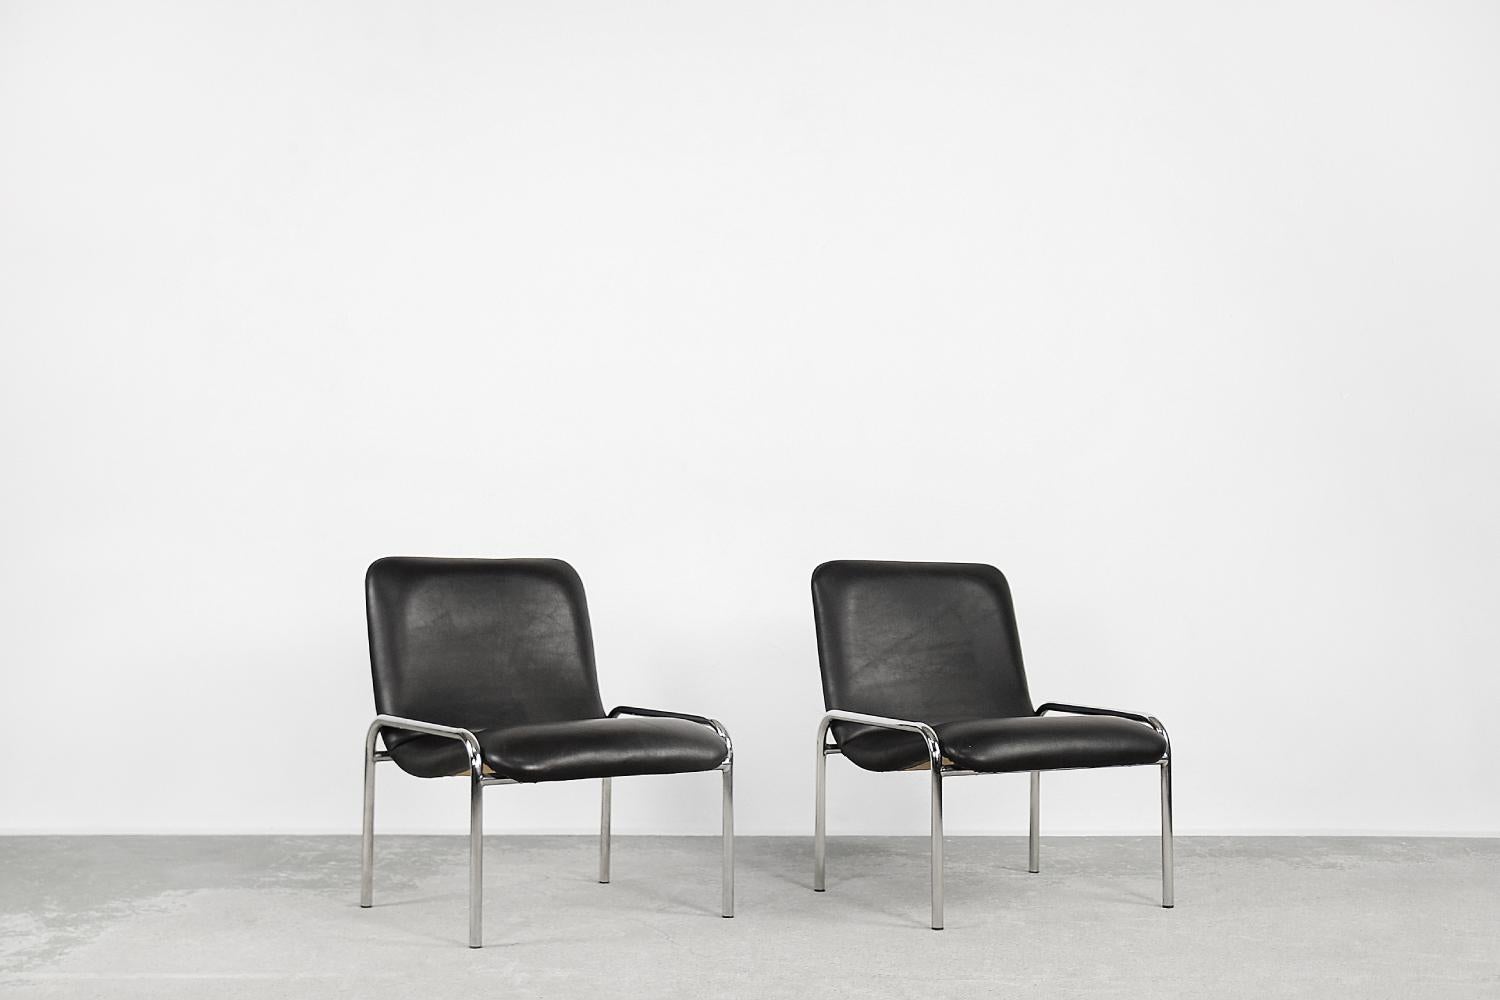 This set of two armchairs was manufactured by the German Thonet manufacture during the 1970s. The frame is made of chrome-plated tubular steel. The chairs are made by plywood and covered with black synthetic leather. The minimalist form adds